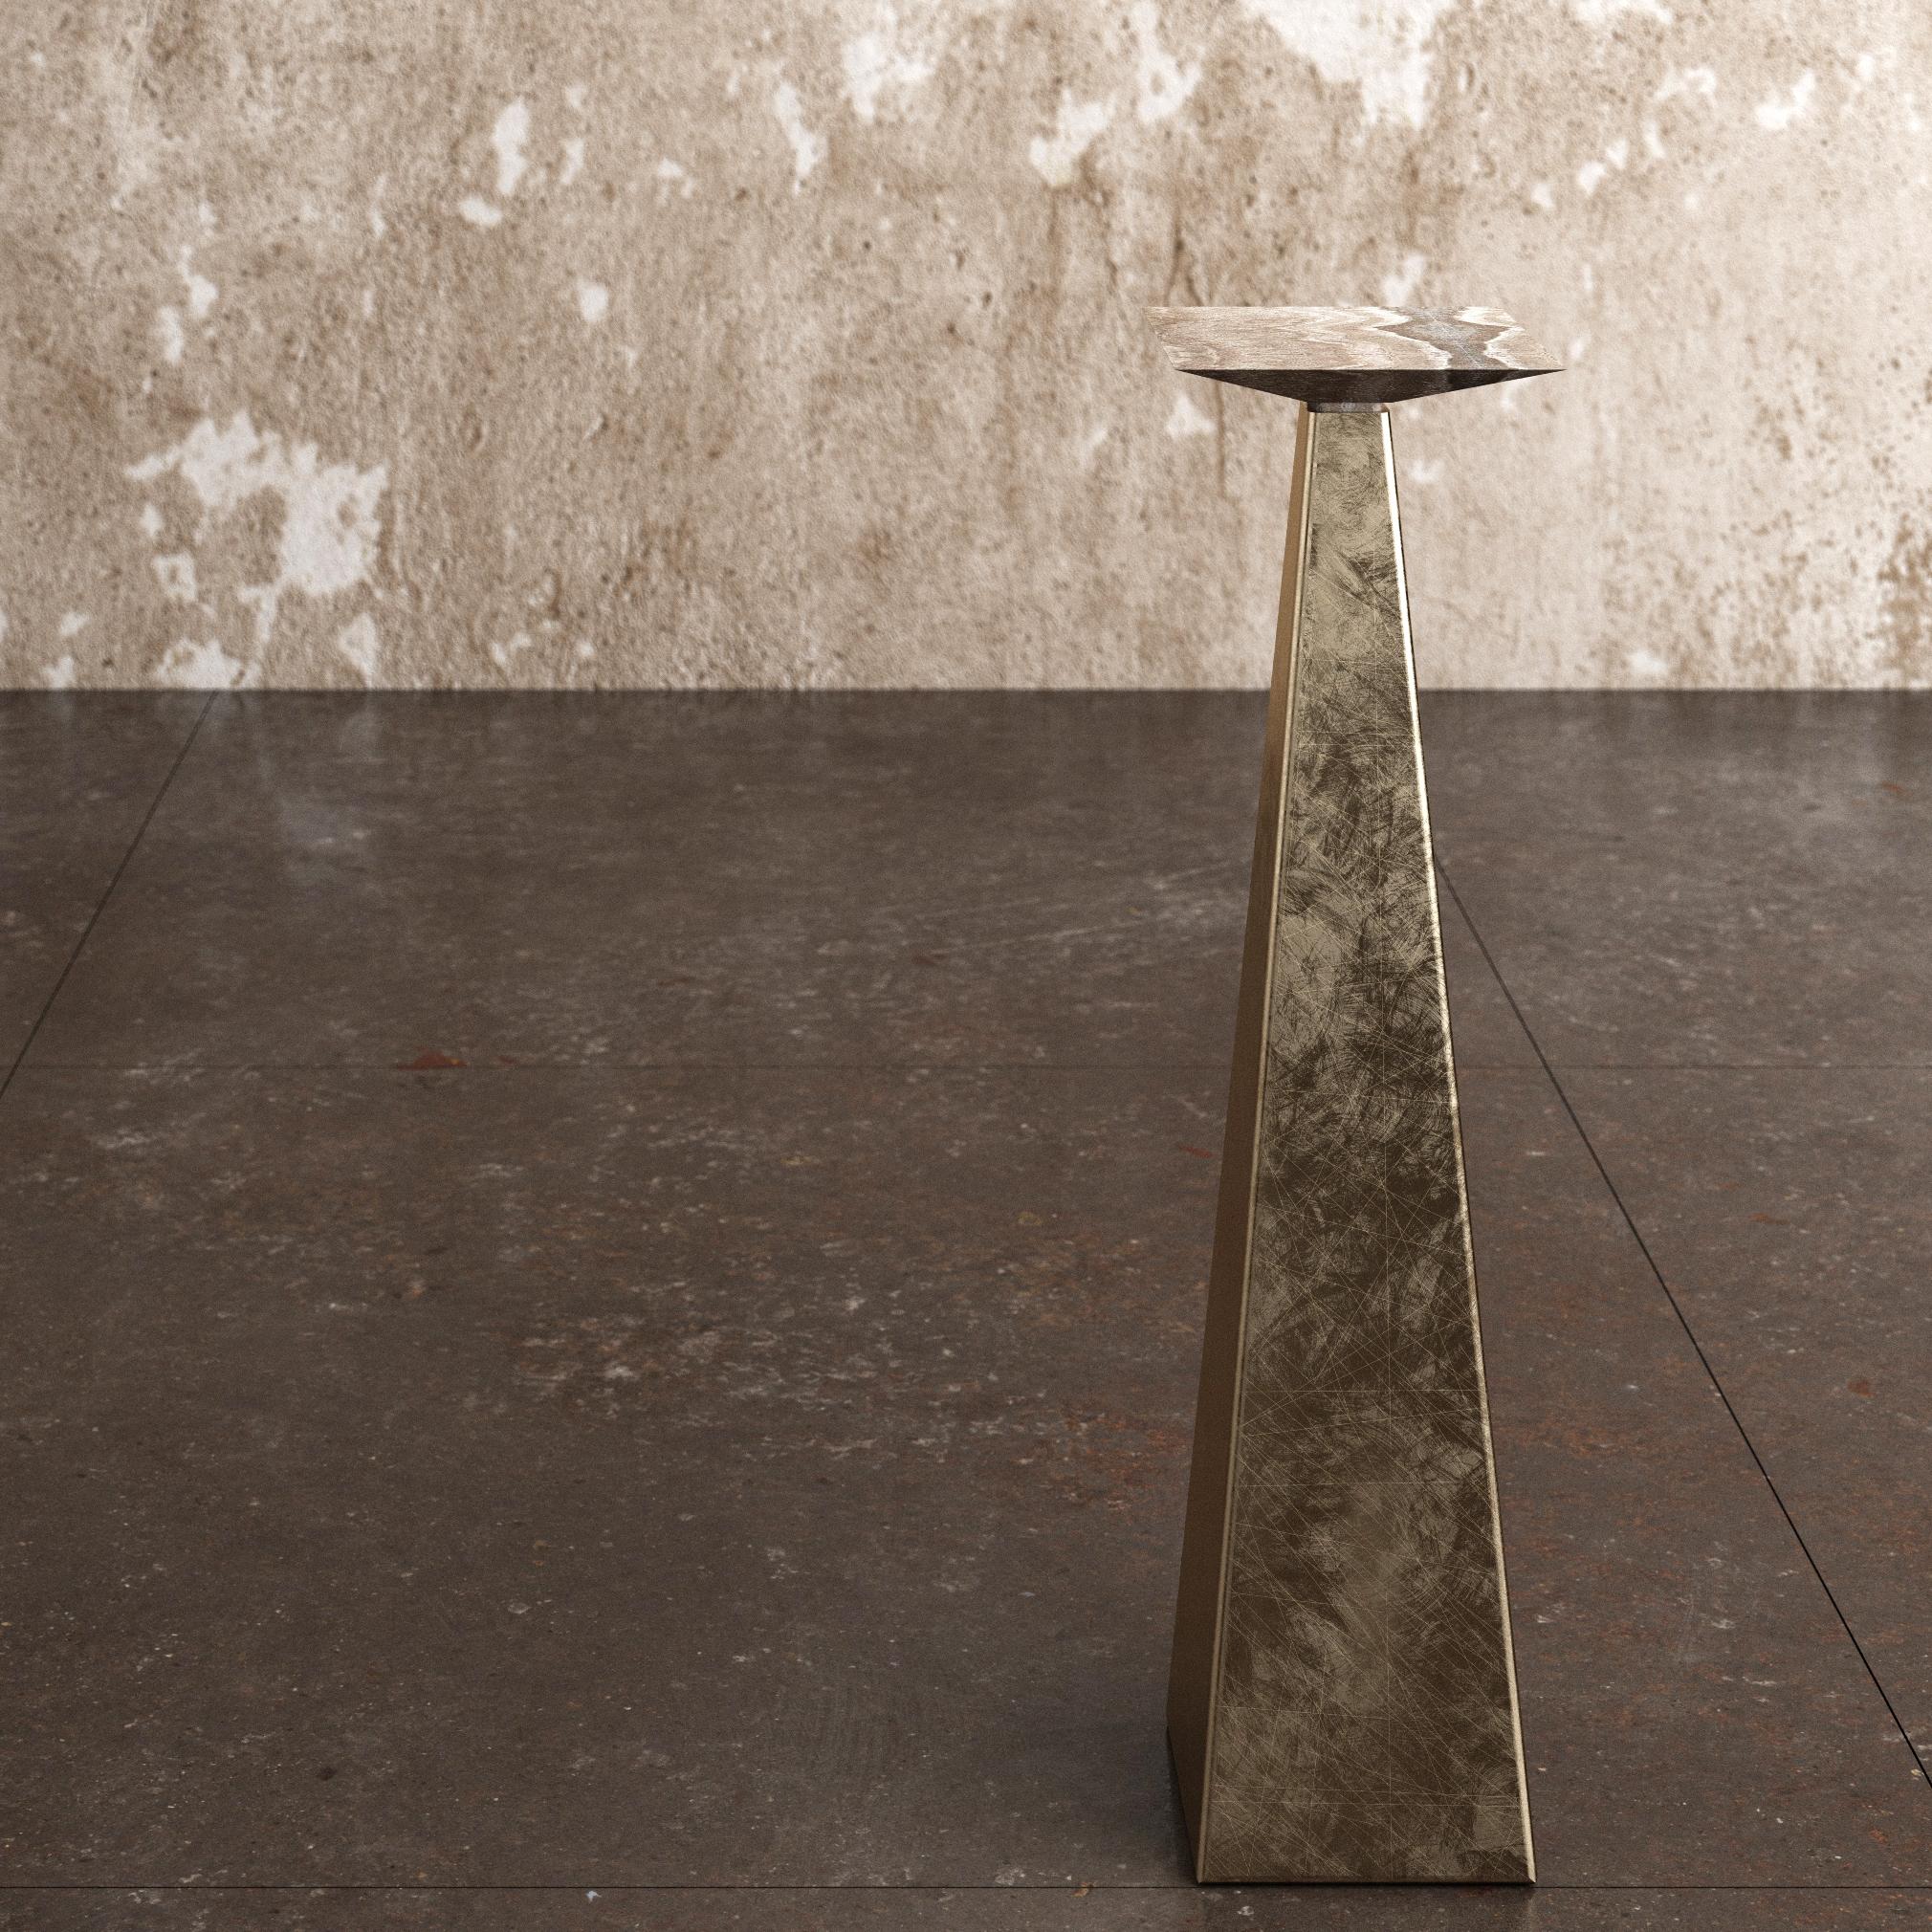 Pair of Contemporary Aged brass Side Table and Stool by Pietro Franceschini
Sold exclusively by Galerie Philia
Materials: Aged brass
Dimensions:
W 19cm, L 19cm, H 73cm
W 76cm, L 31cm, H 45cm

Origin: Italy
Fonderia Artù


Pietro